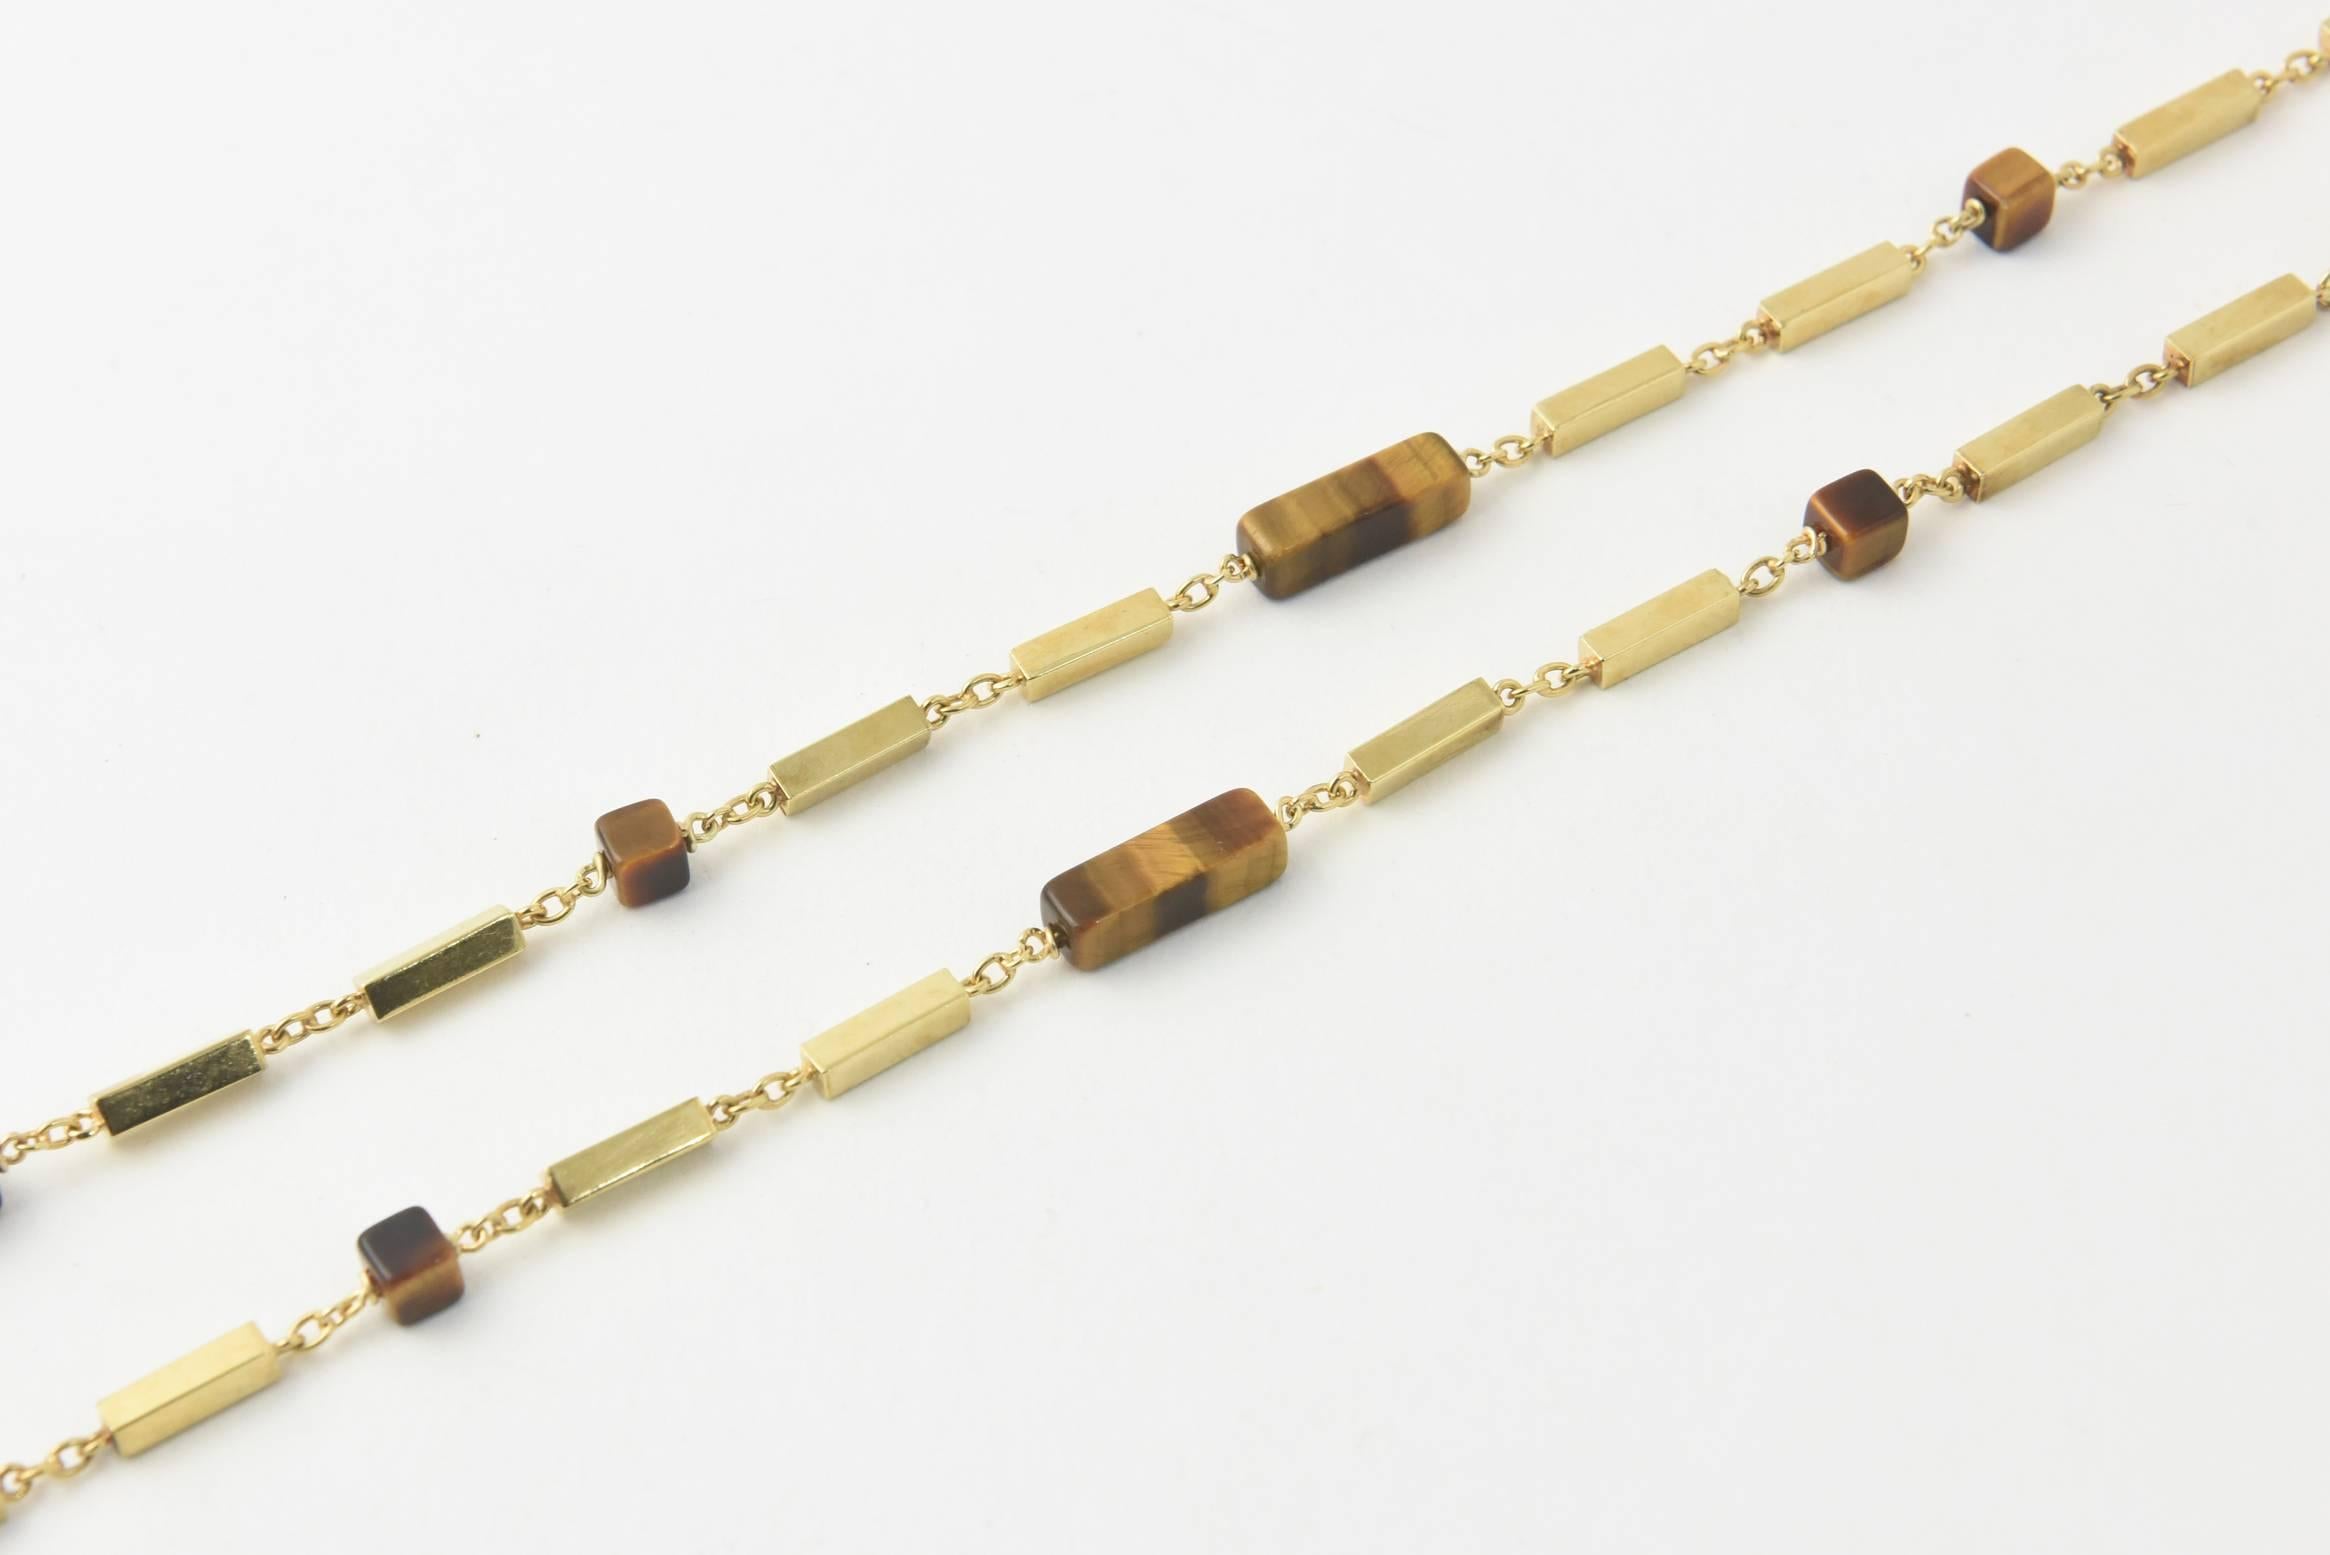 Tiger's eye and 14k yellow gold bar necklace featuring rectangular and square tiger eye beads. Each gold bar, 0.44